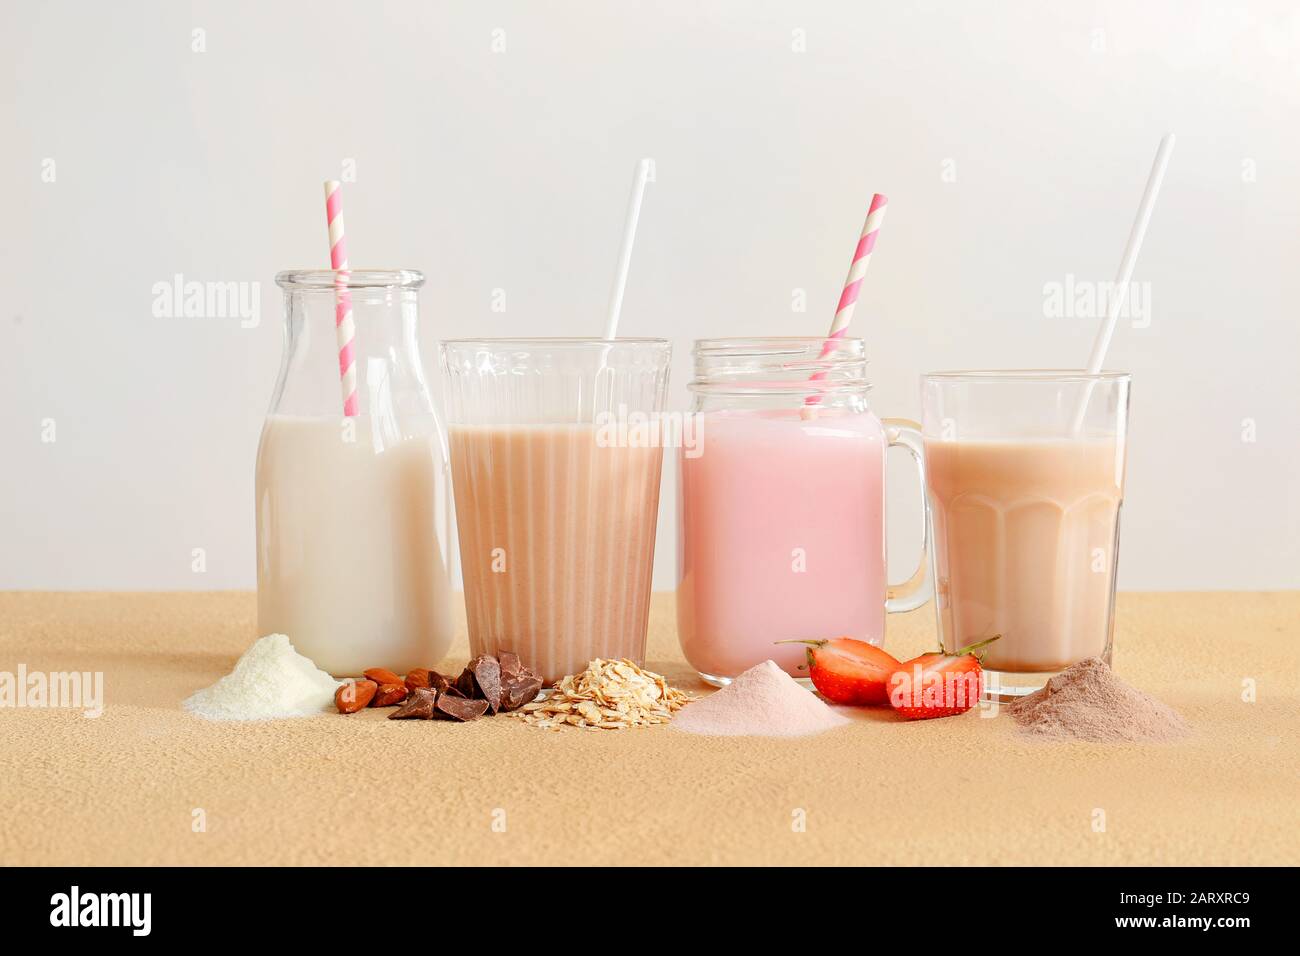 Assortment of protein shakes on table Stock Photo